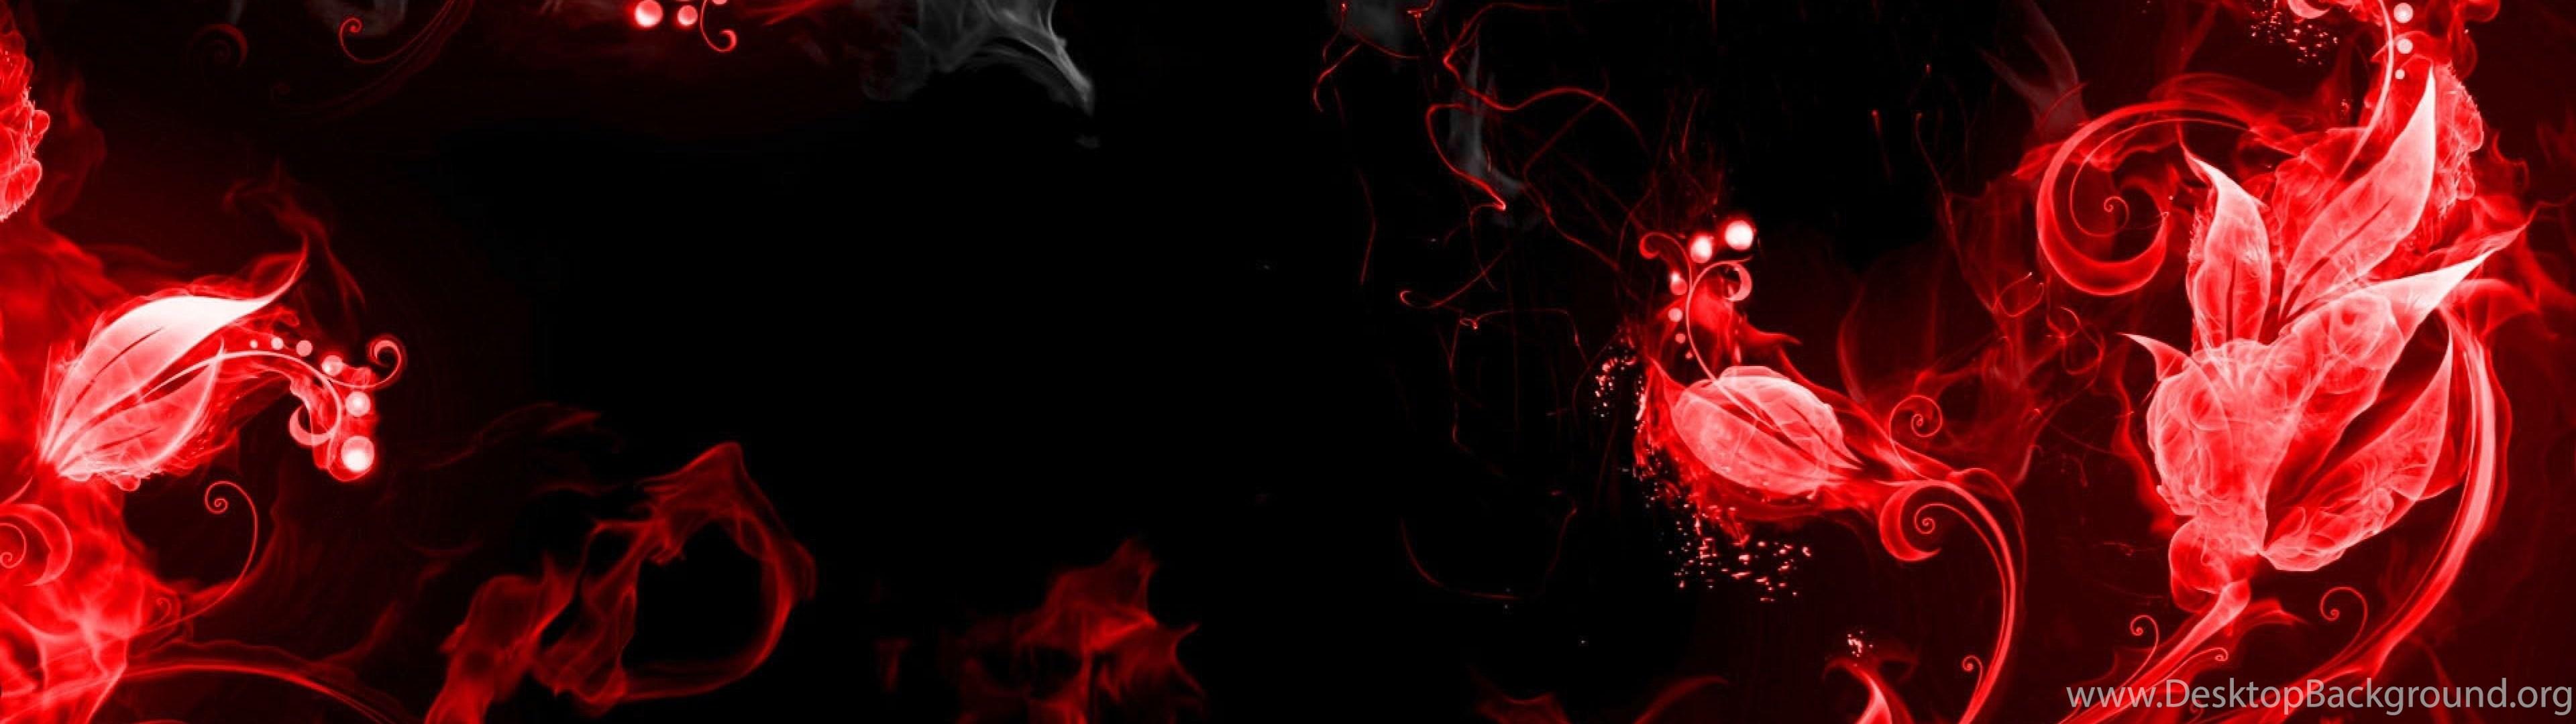 Red and Black Dual Monitor Wallpapers - Top Free Red and Black Dual